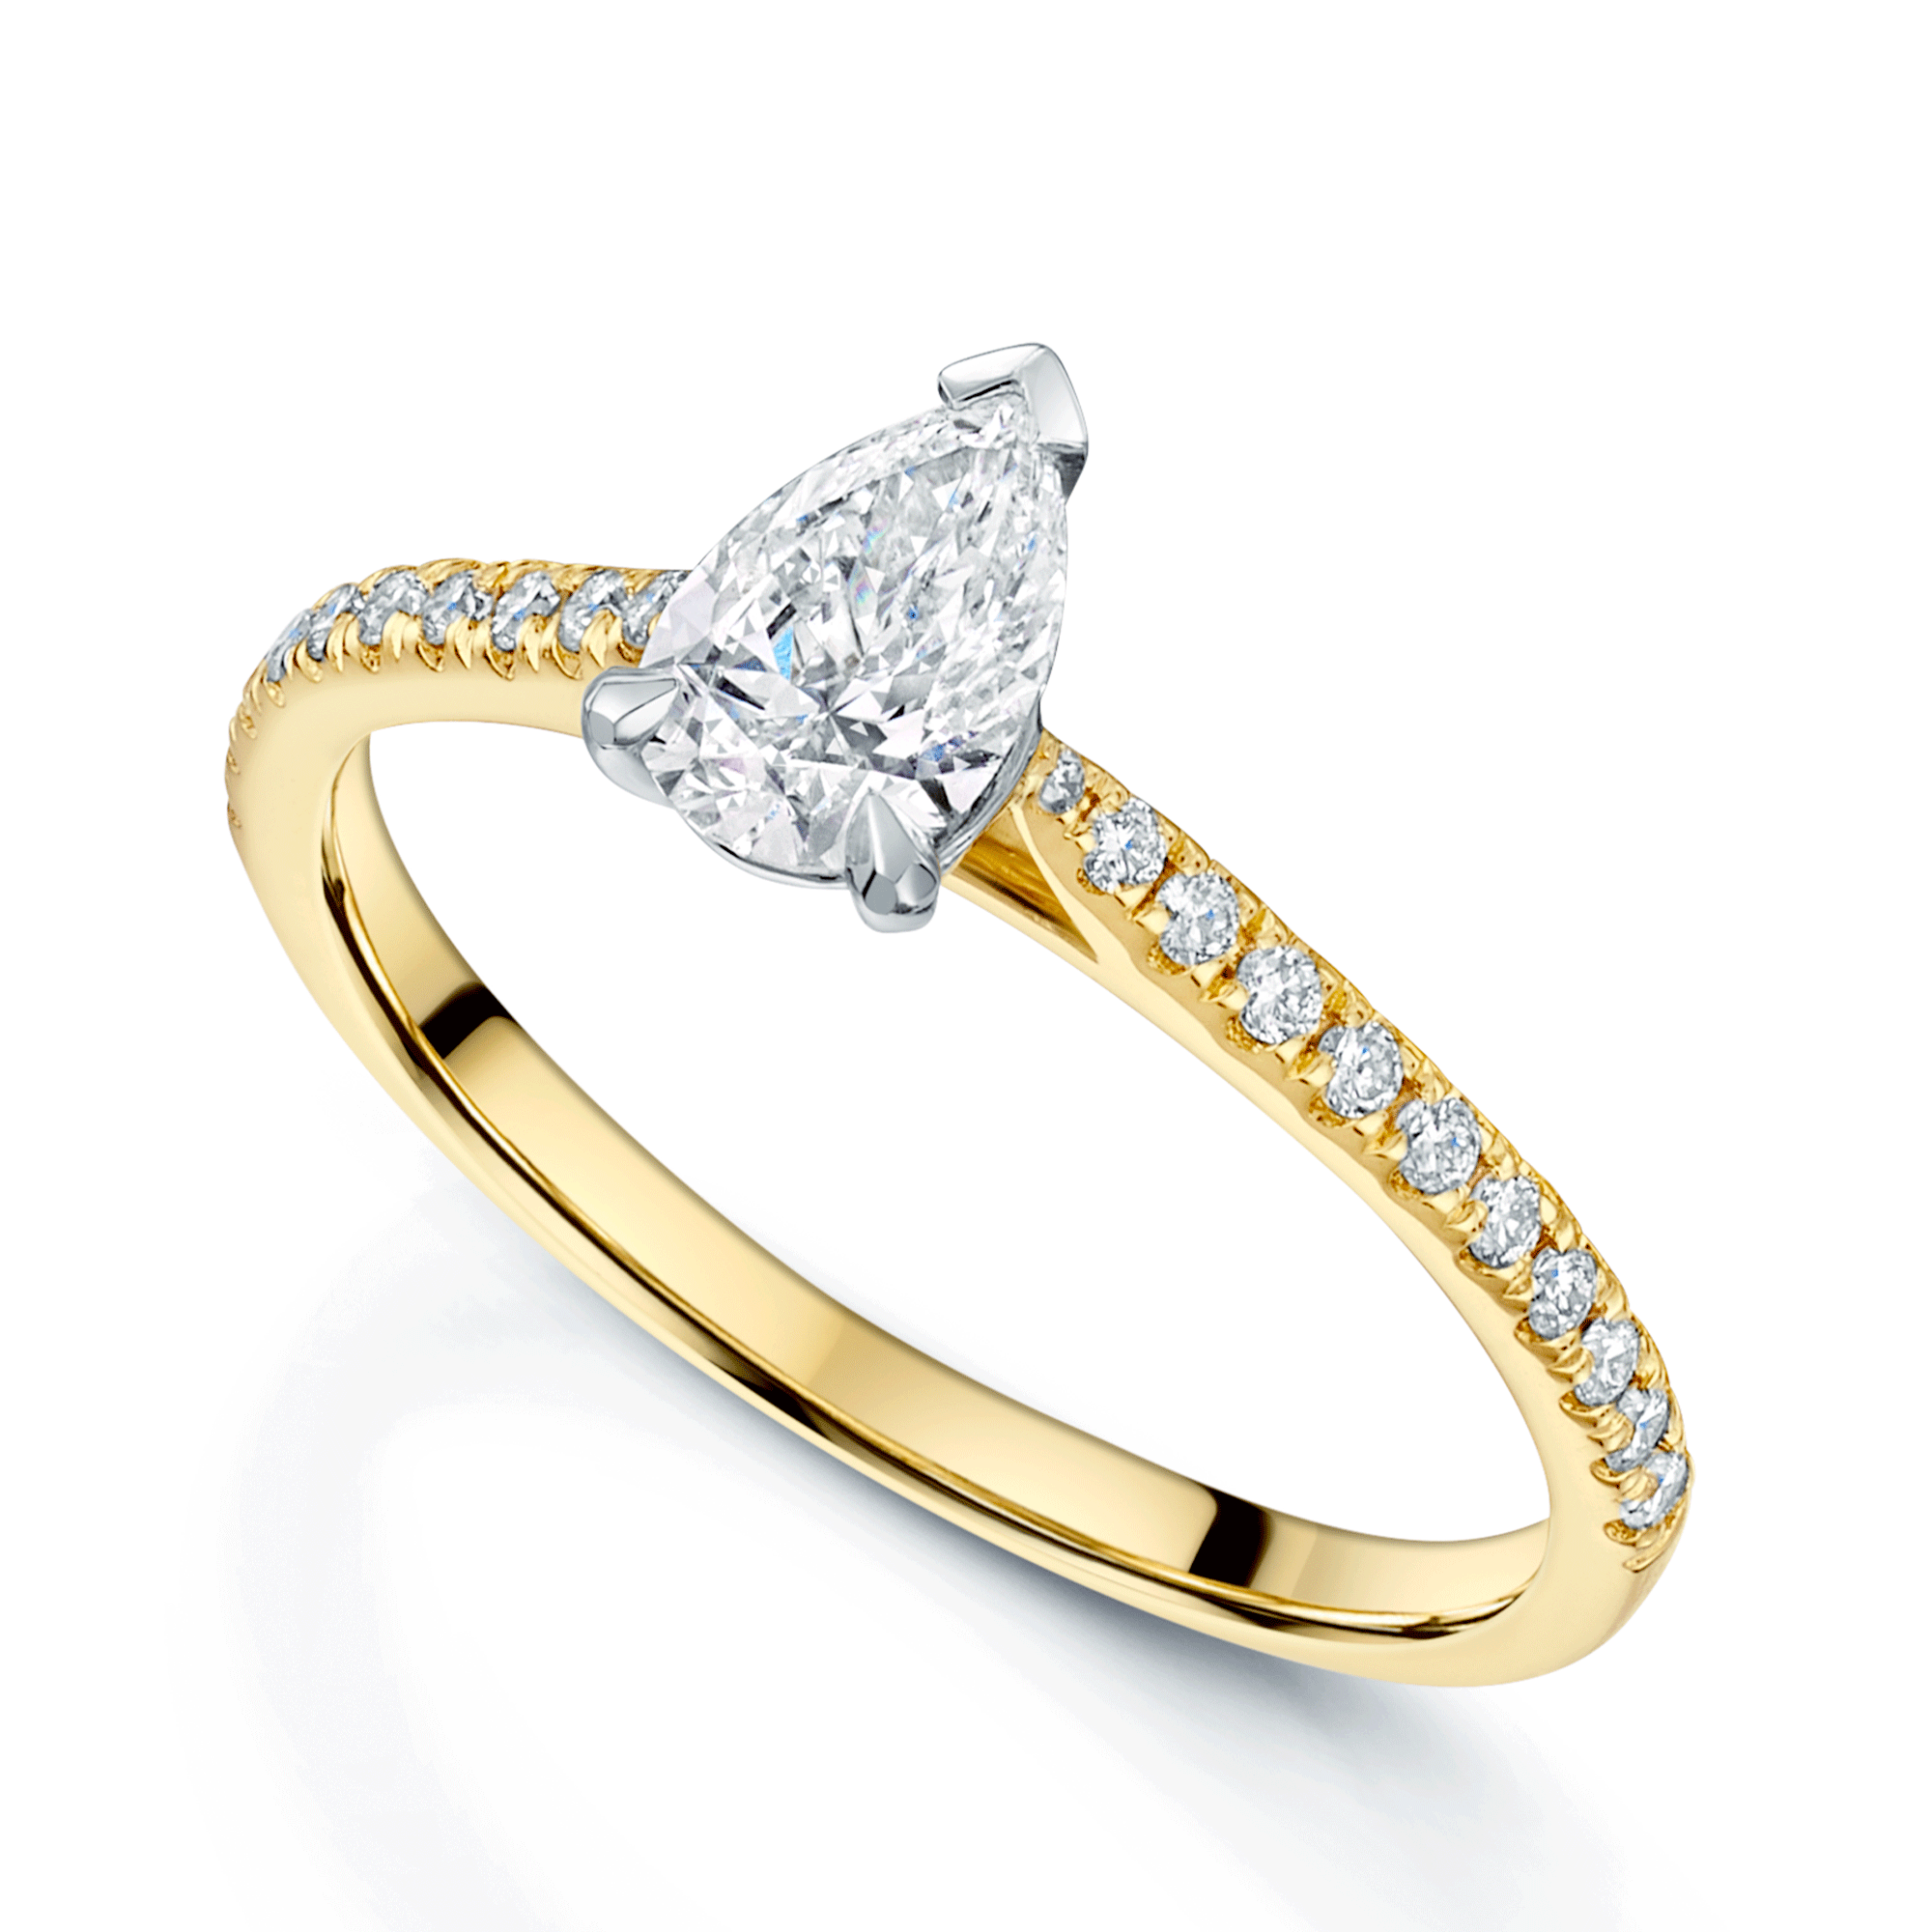 18ct Yellow Gold GIA Certificated Pear Cut Diamond Engagement Ring With Diamond Shoulders